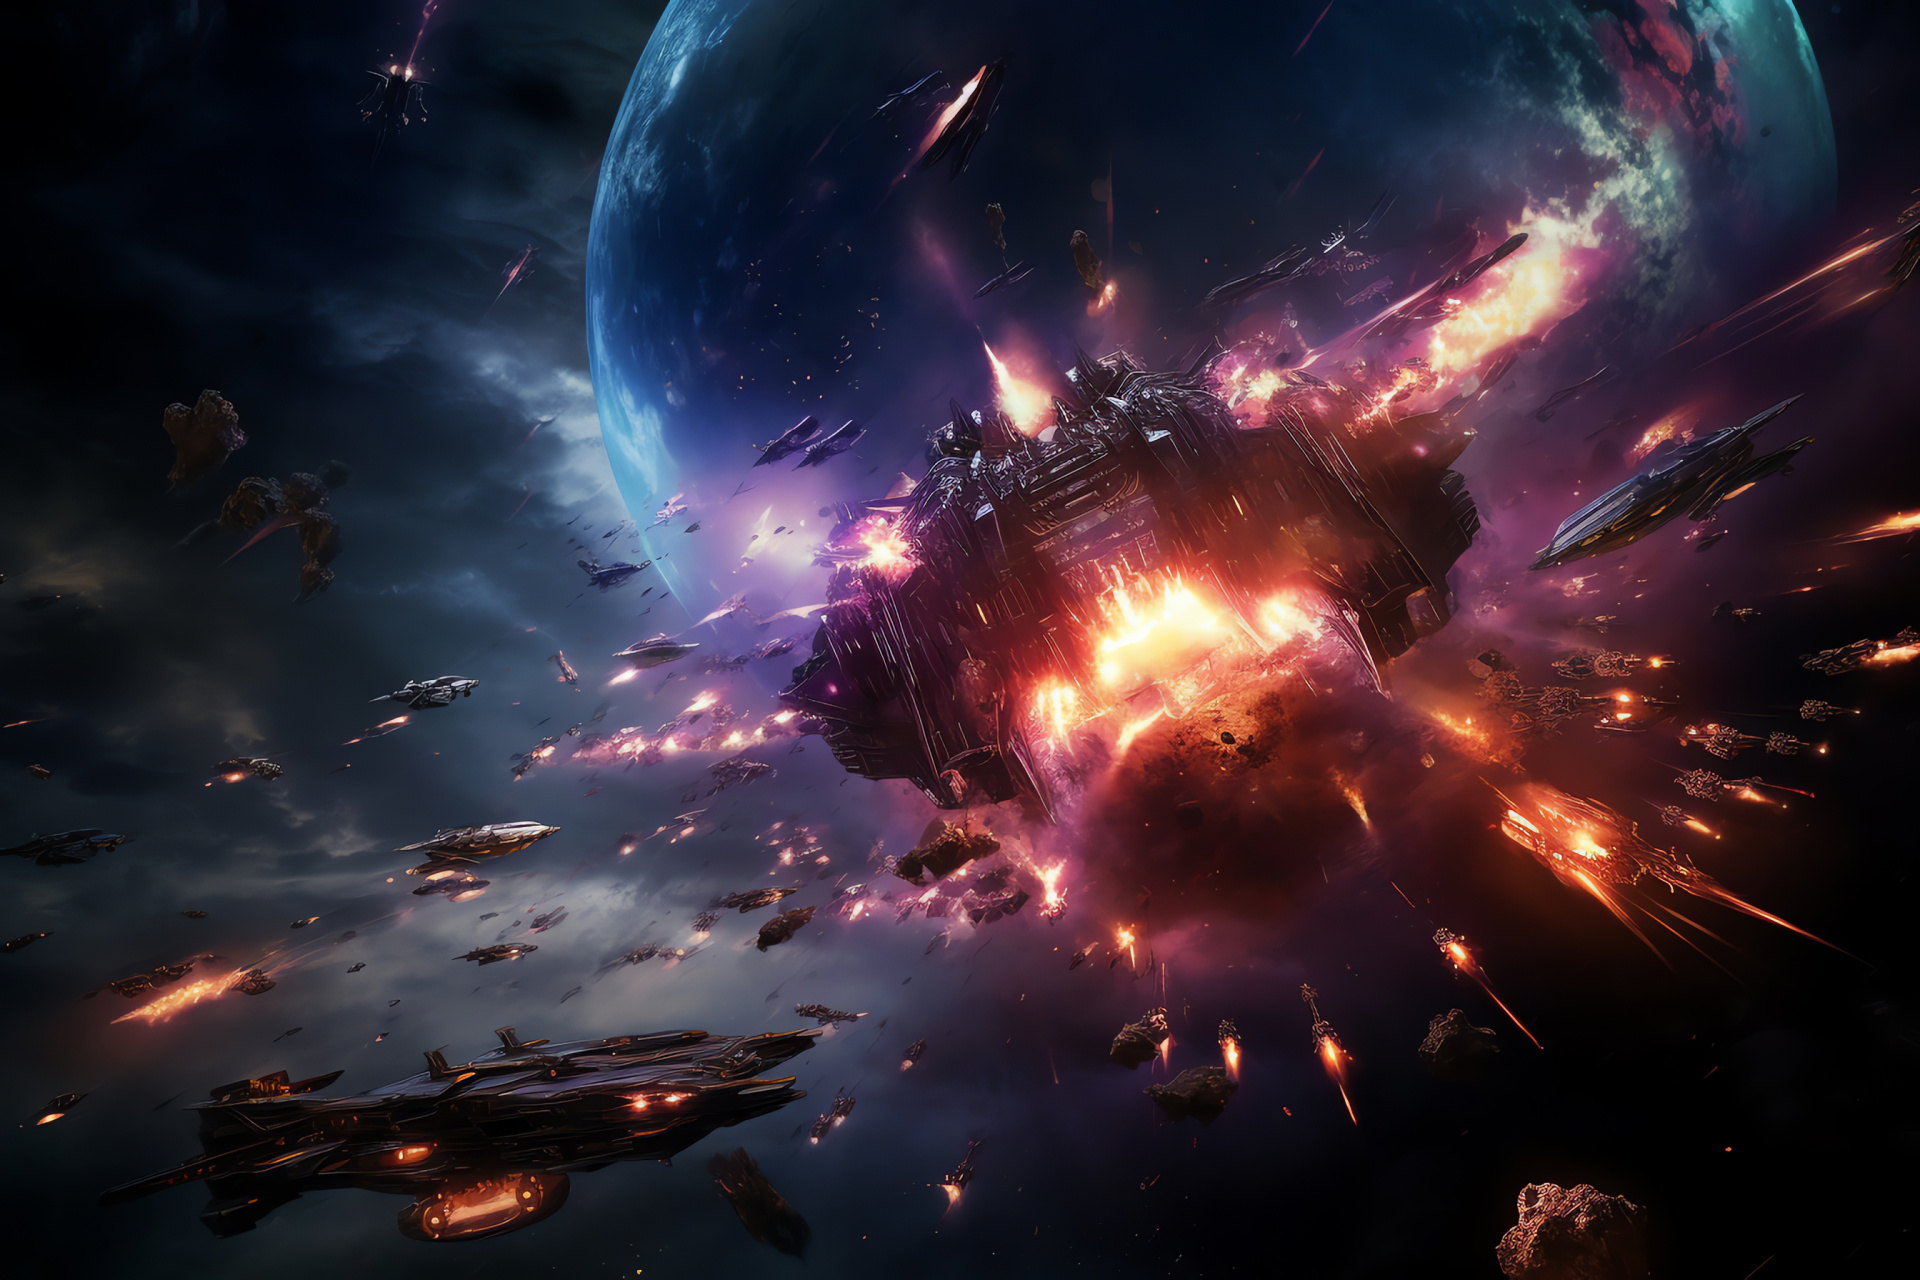 Galactic skirmish, imposing detonations, wide-angle perspective, formidable forces, inferno blasts, HD Desktop Image